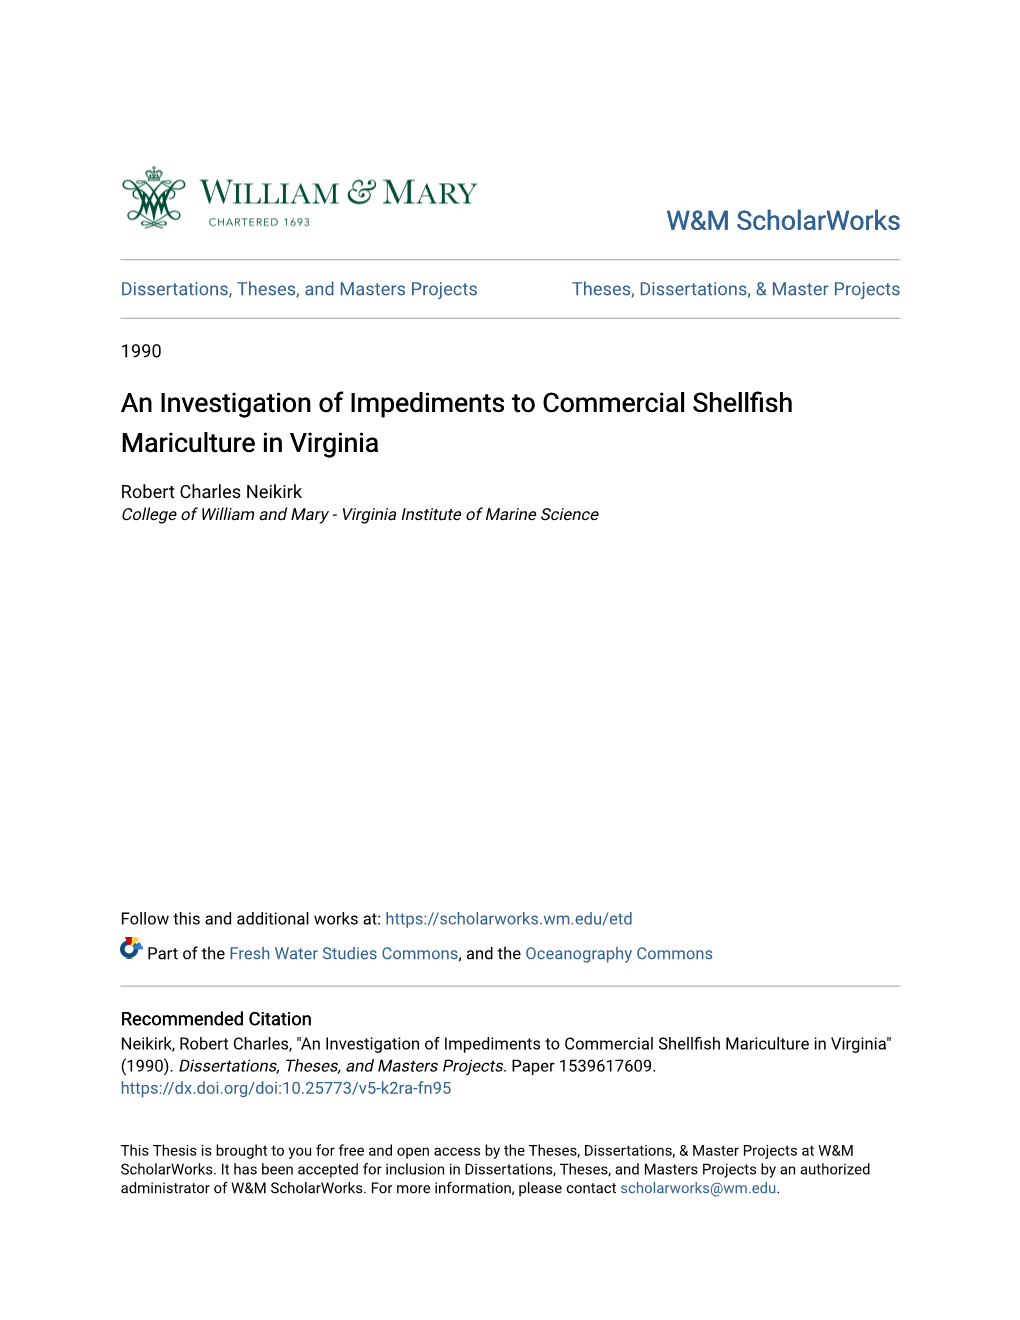 An Investigation of Impediments to Commercial Shellfish Mariculture in Virginia